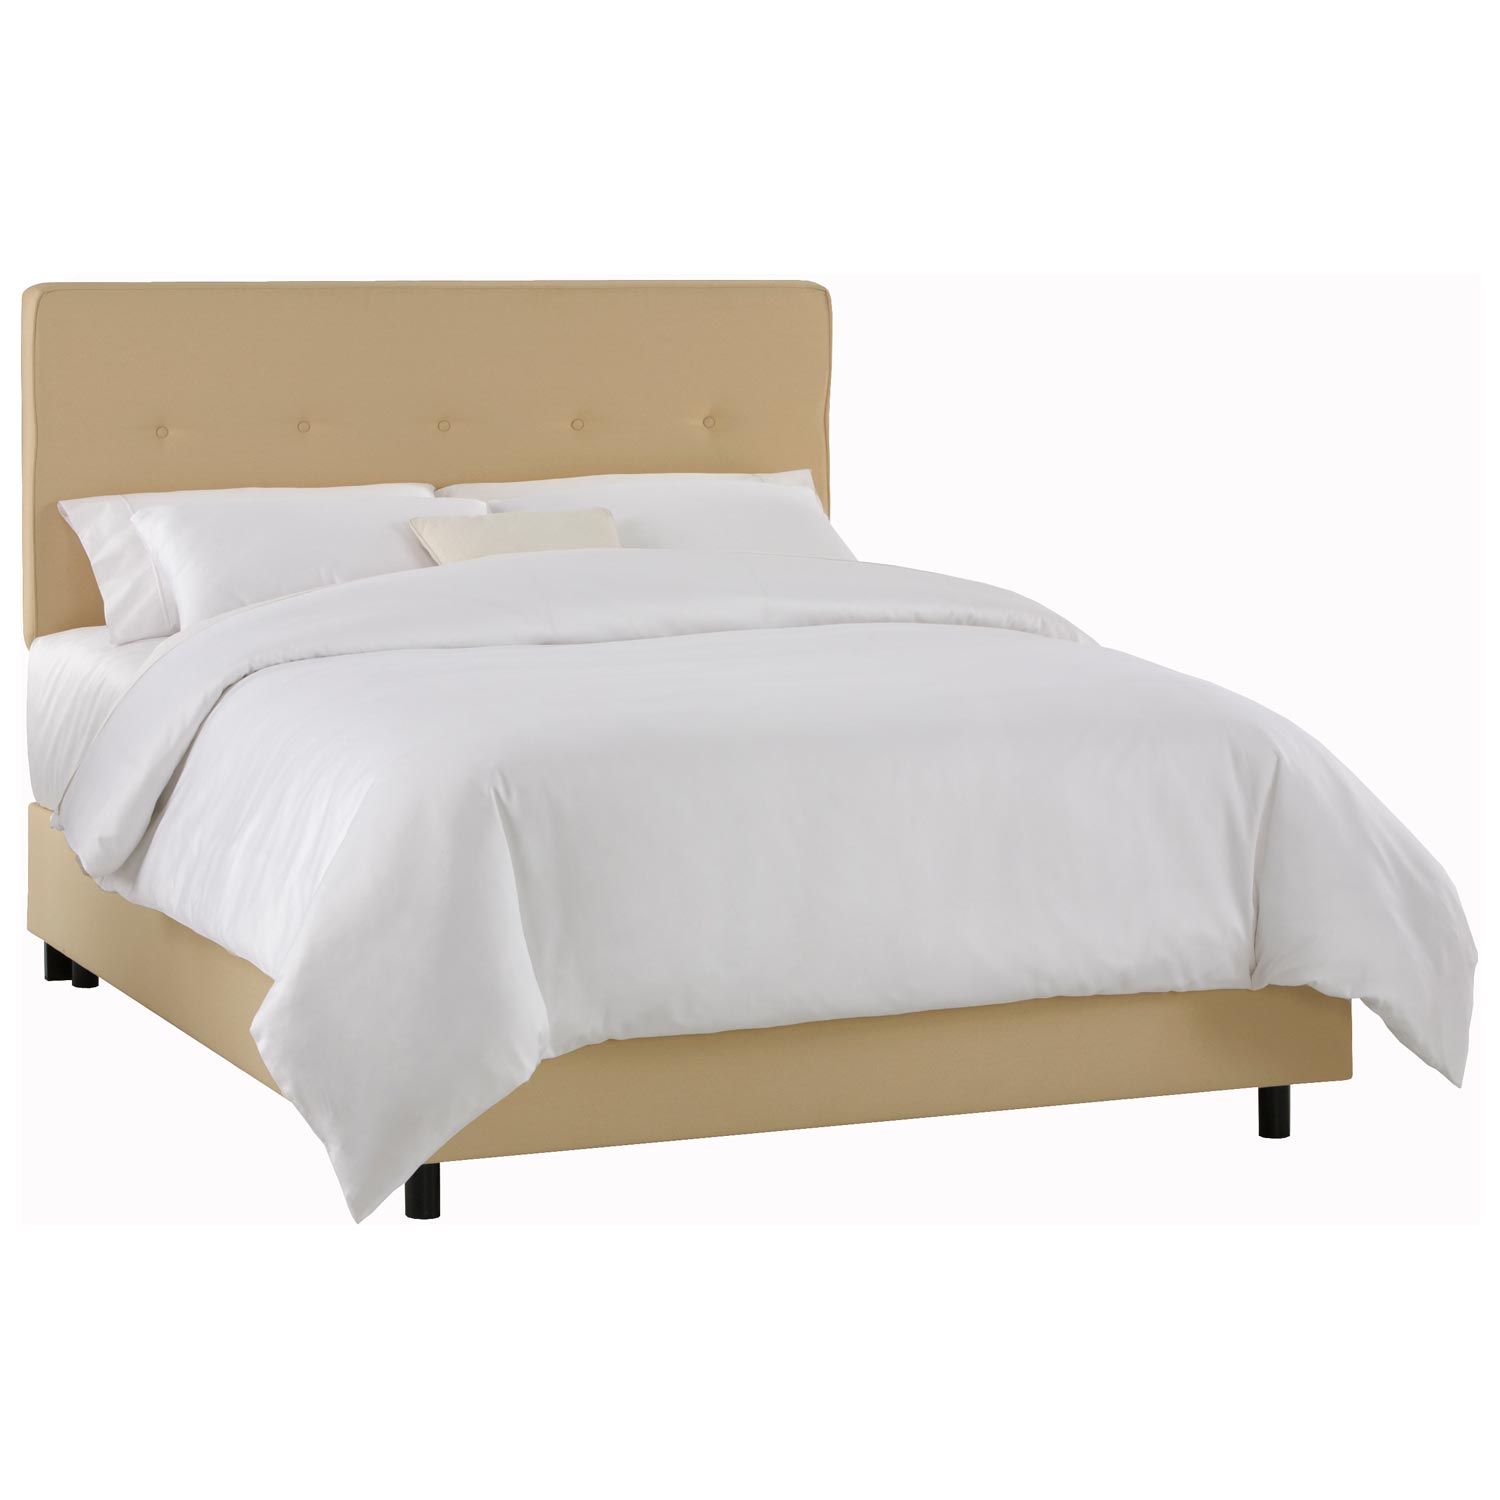 Cassiopeia Upholstered Bed - Twill, Button Accents, Khaki | DCG Stores